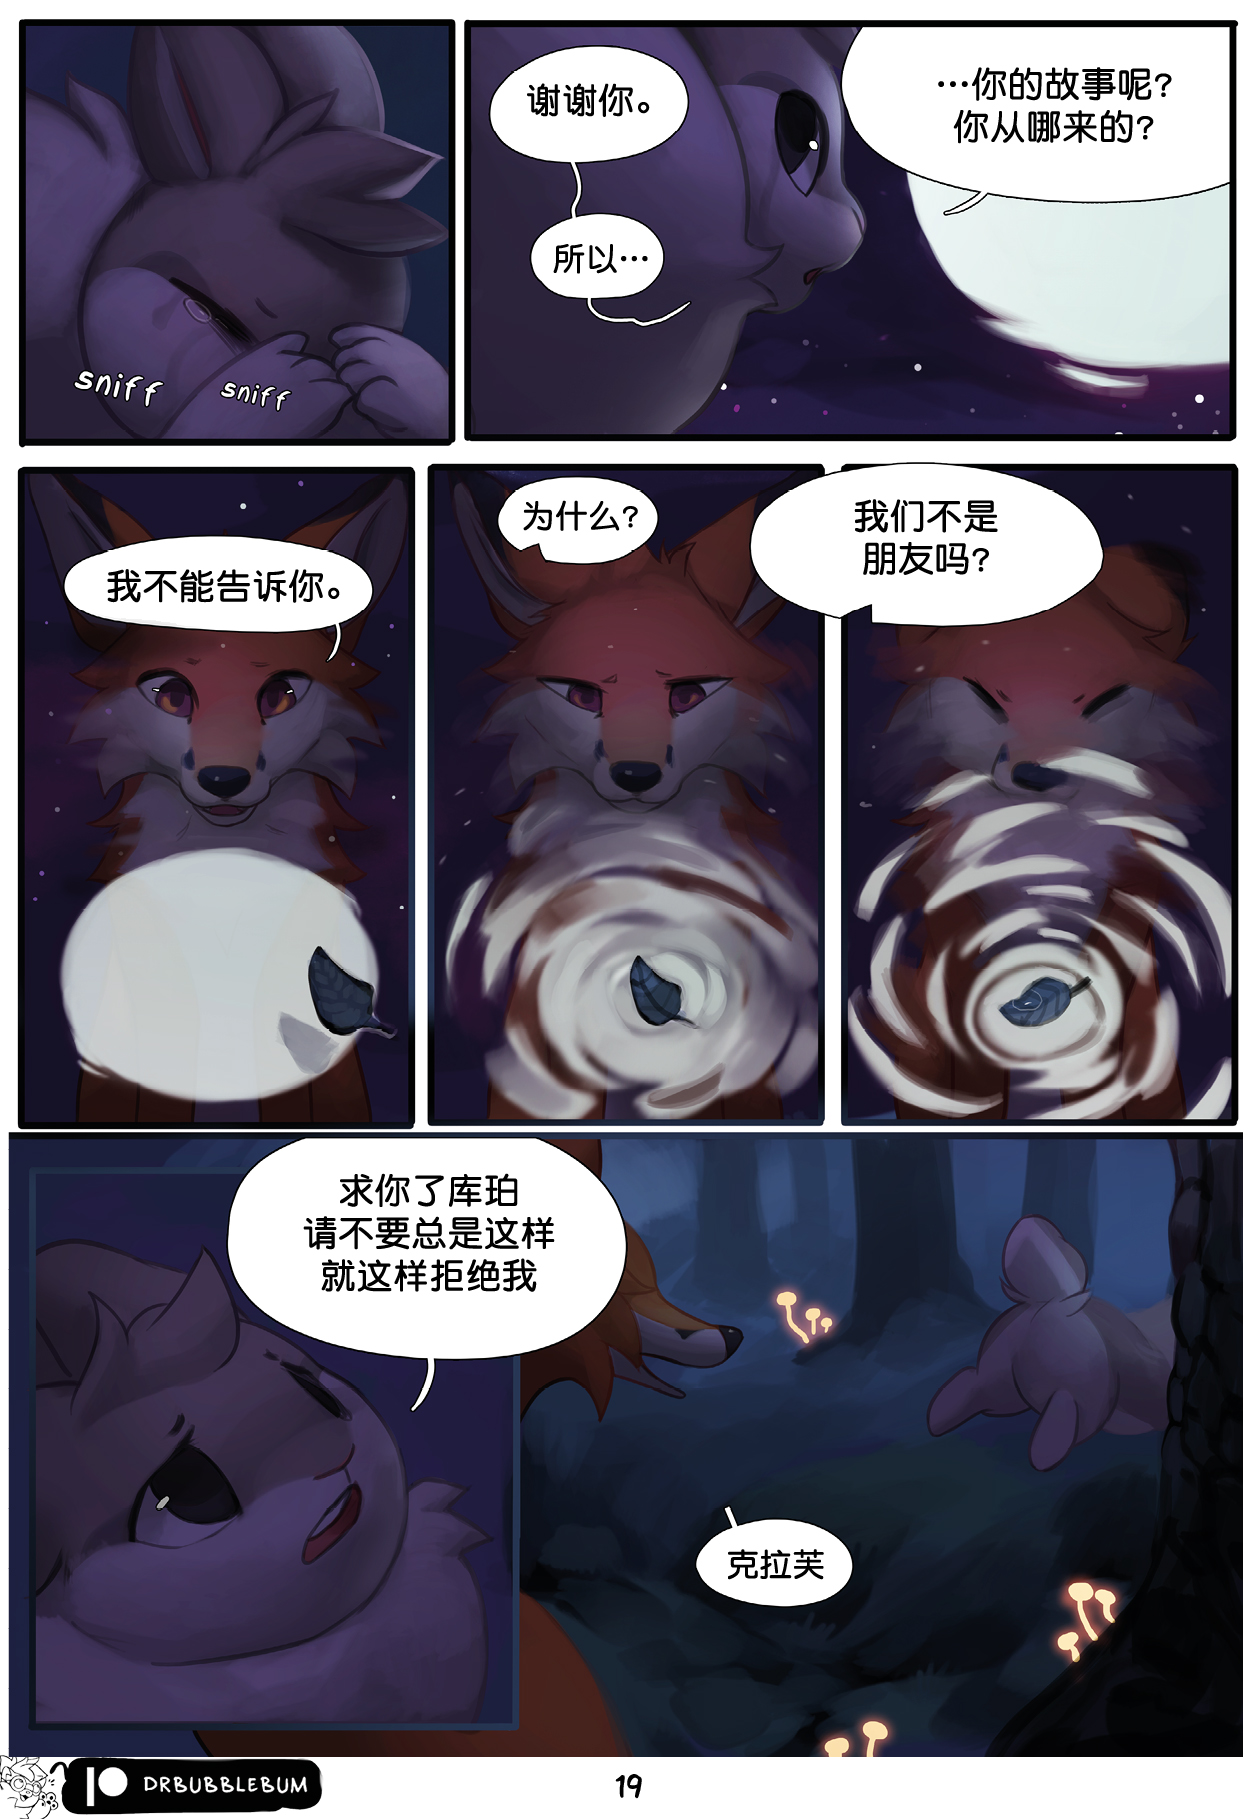 [Dr.BubbleBum] Force of Nature 自然之力 1-2 [Chinese] [逃亡者×真不可视汉化组] 